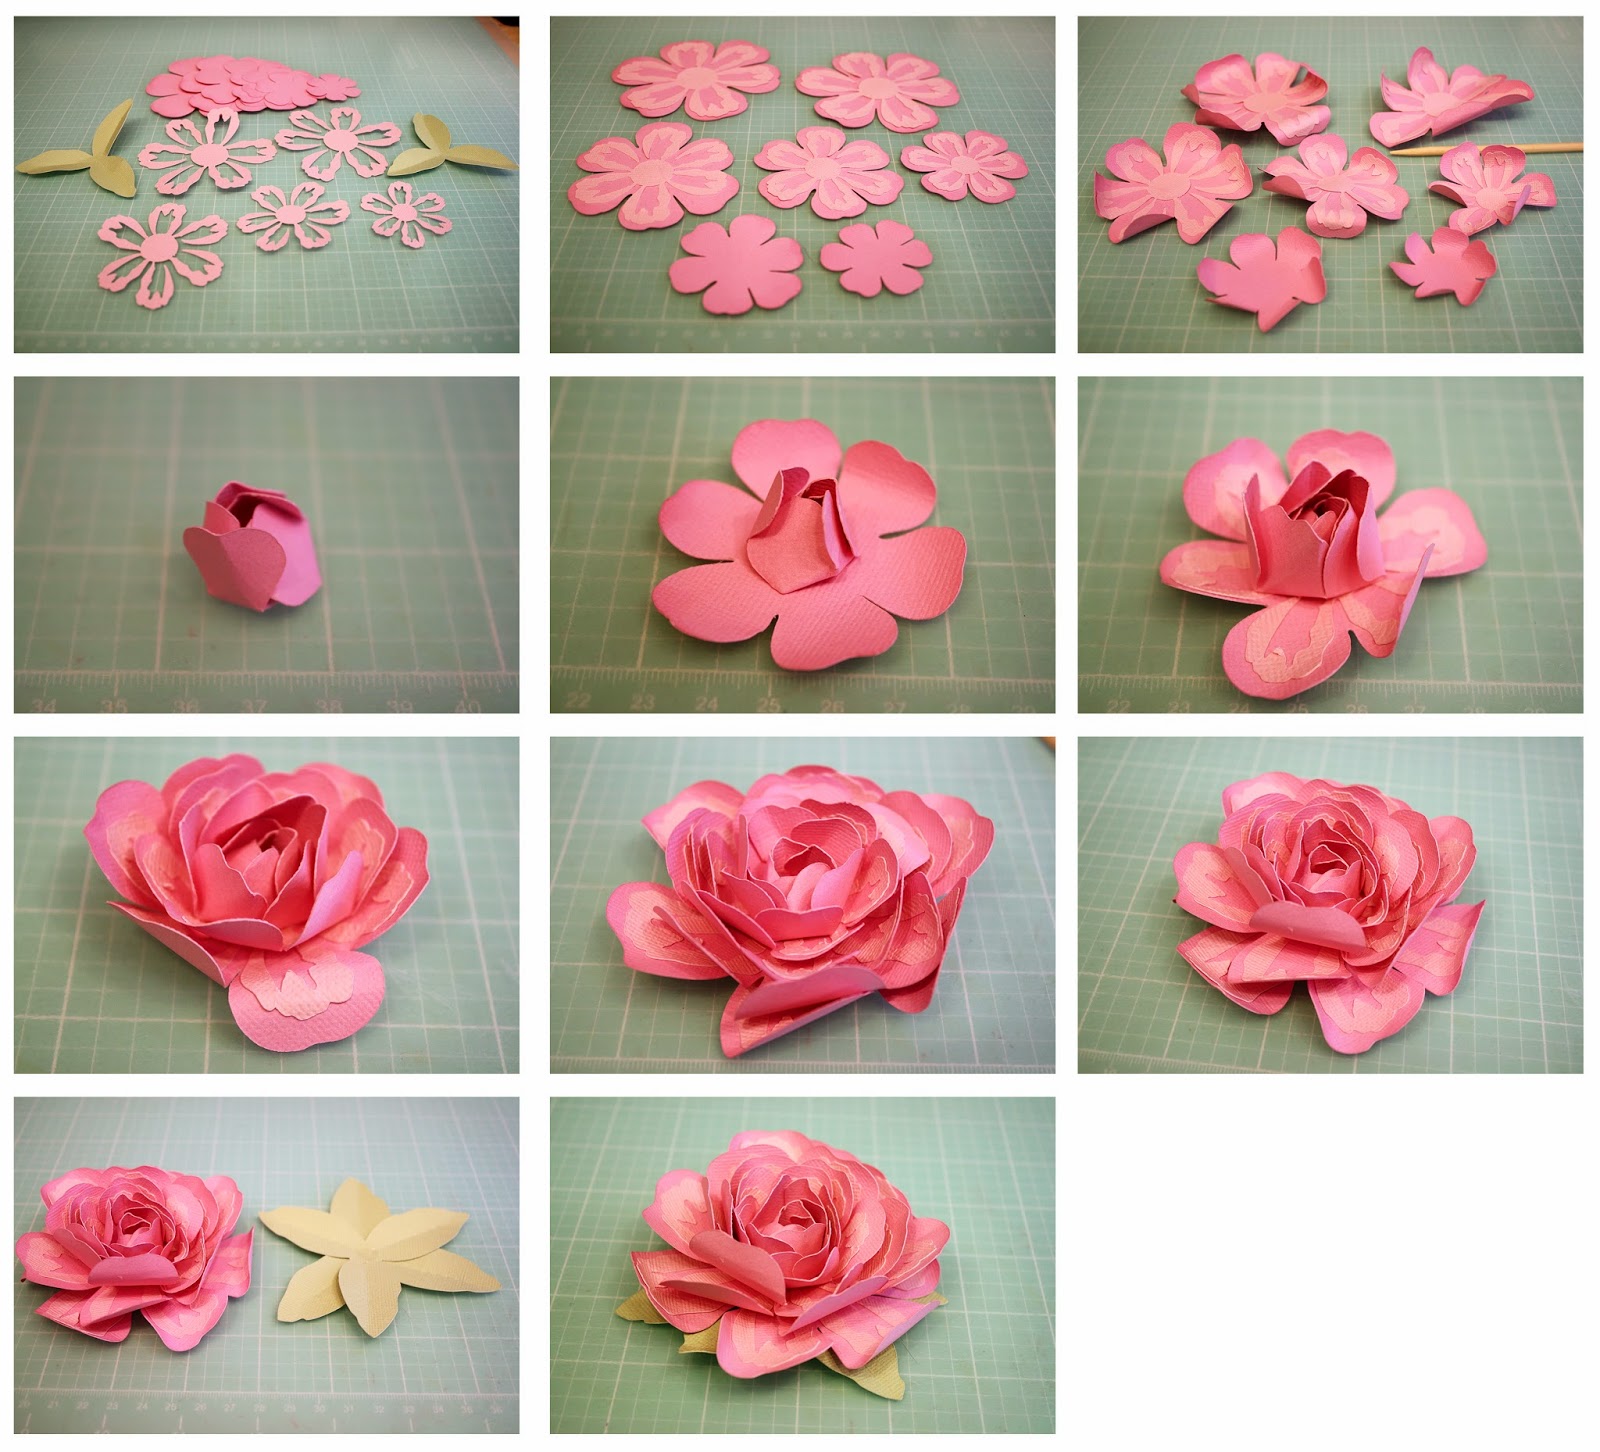 Download Bits of Paper: 3D Layered Rose and Penstemon Paper Flowers